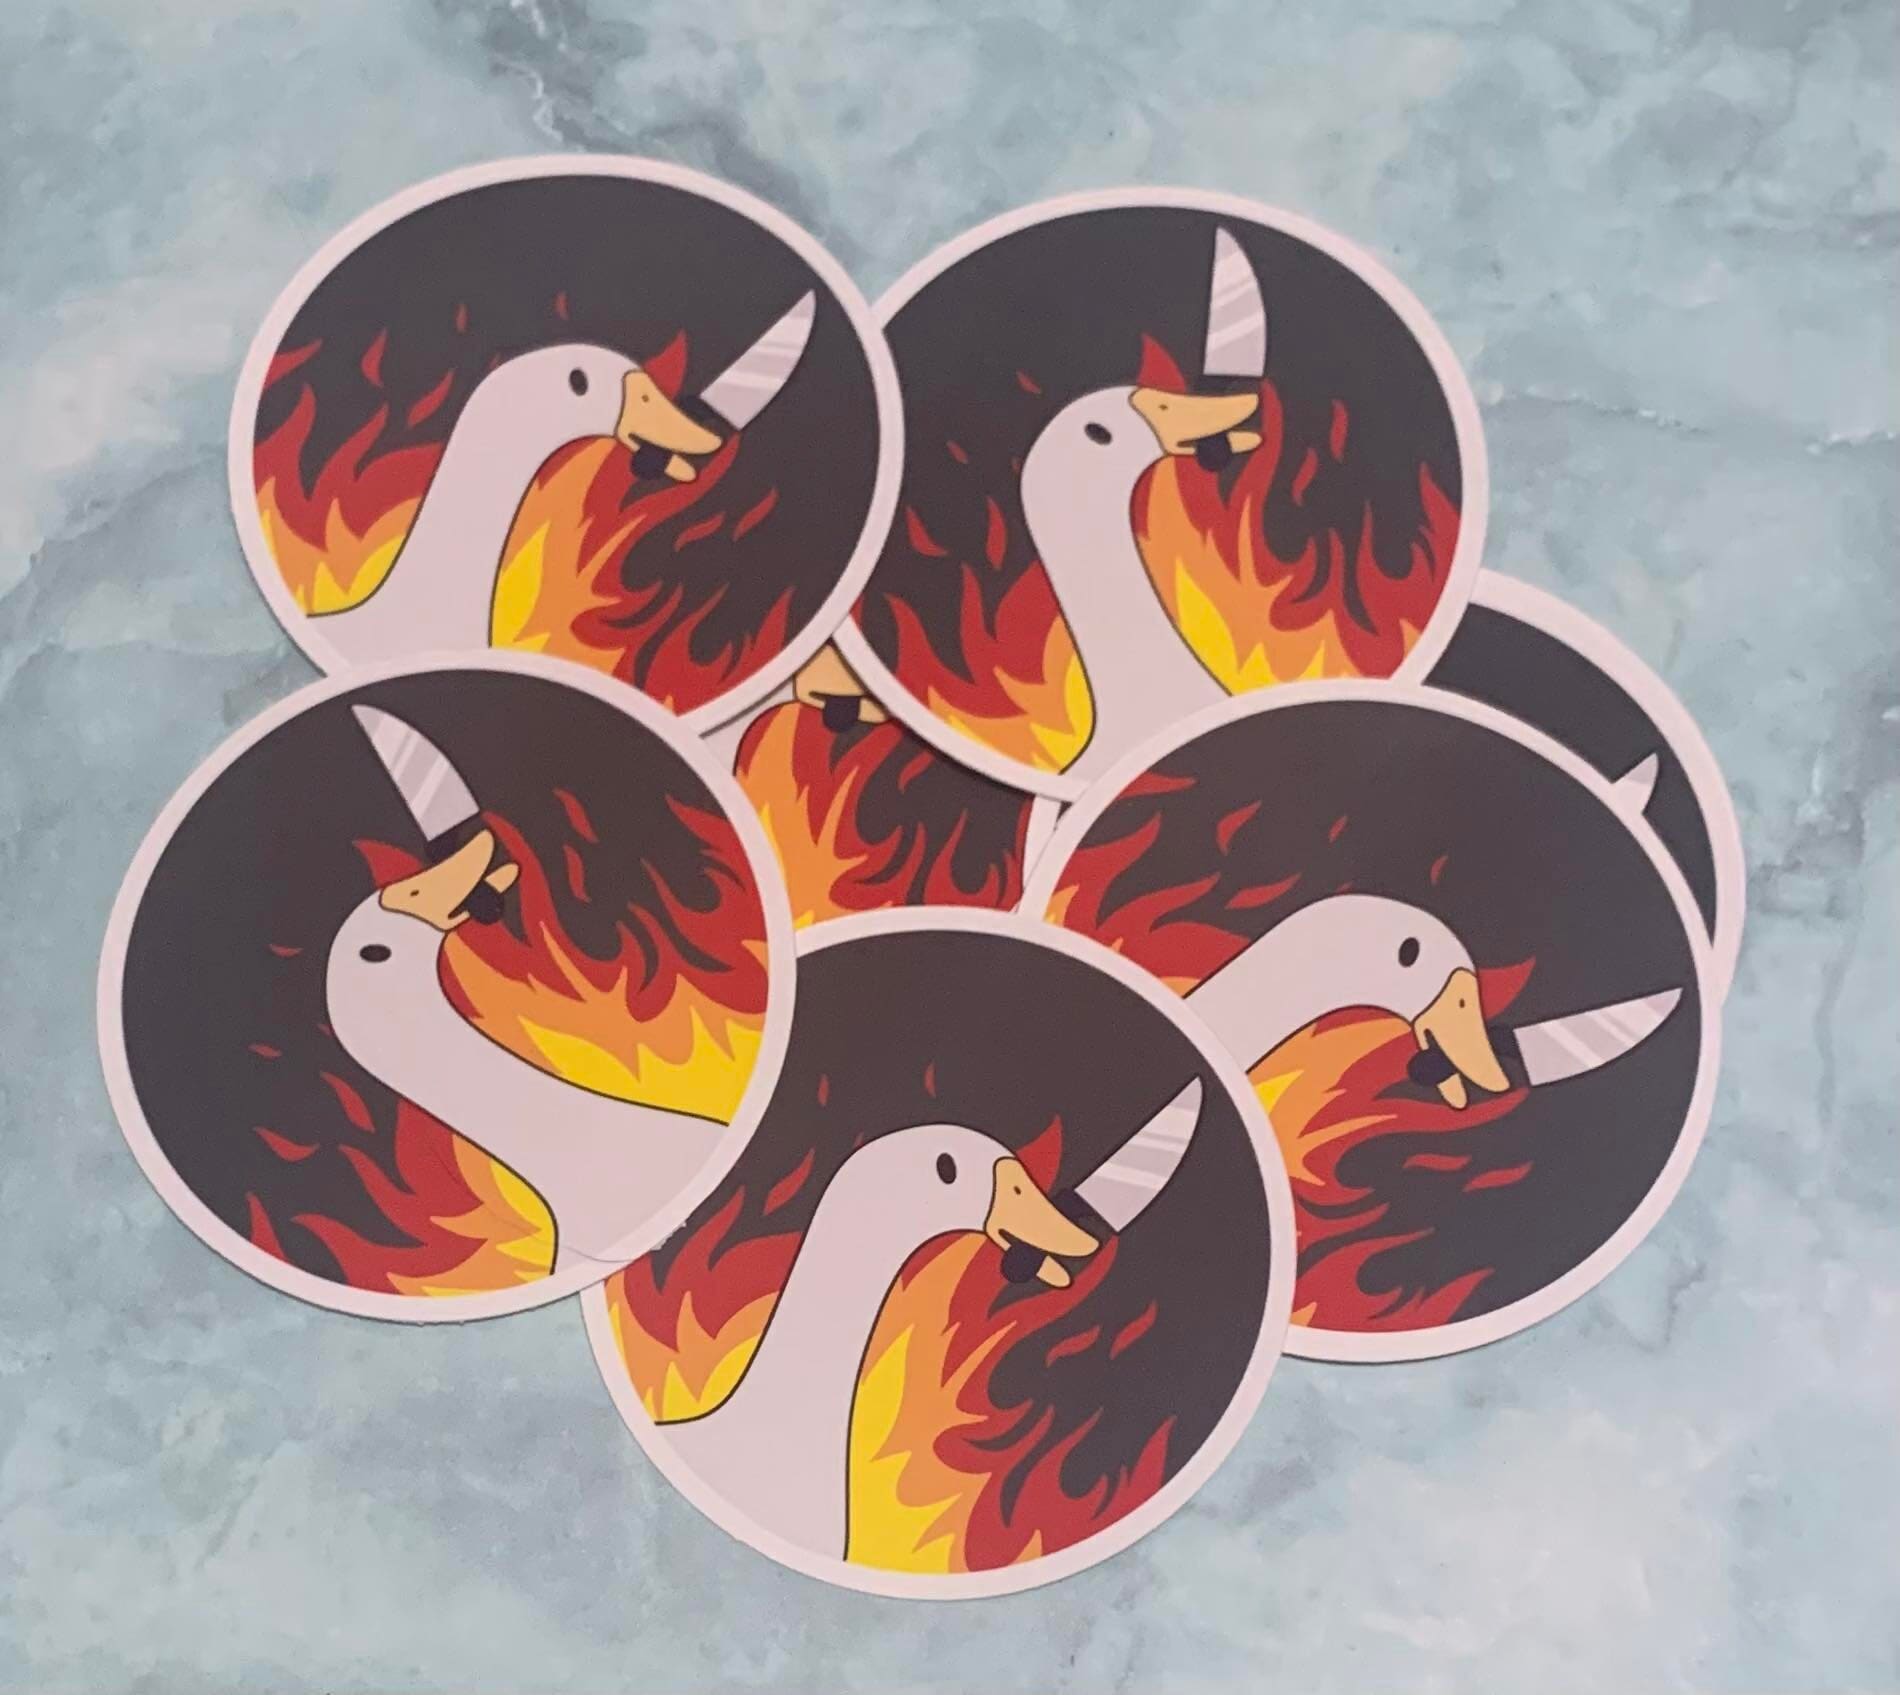 Goose Sticker Two Sizes 2.8x4 or Large 5.5x4.5 Inches Multipack Discount 